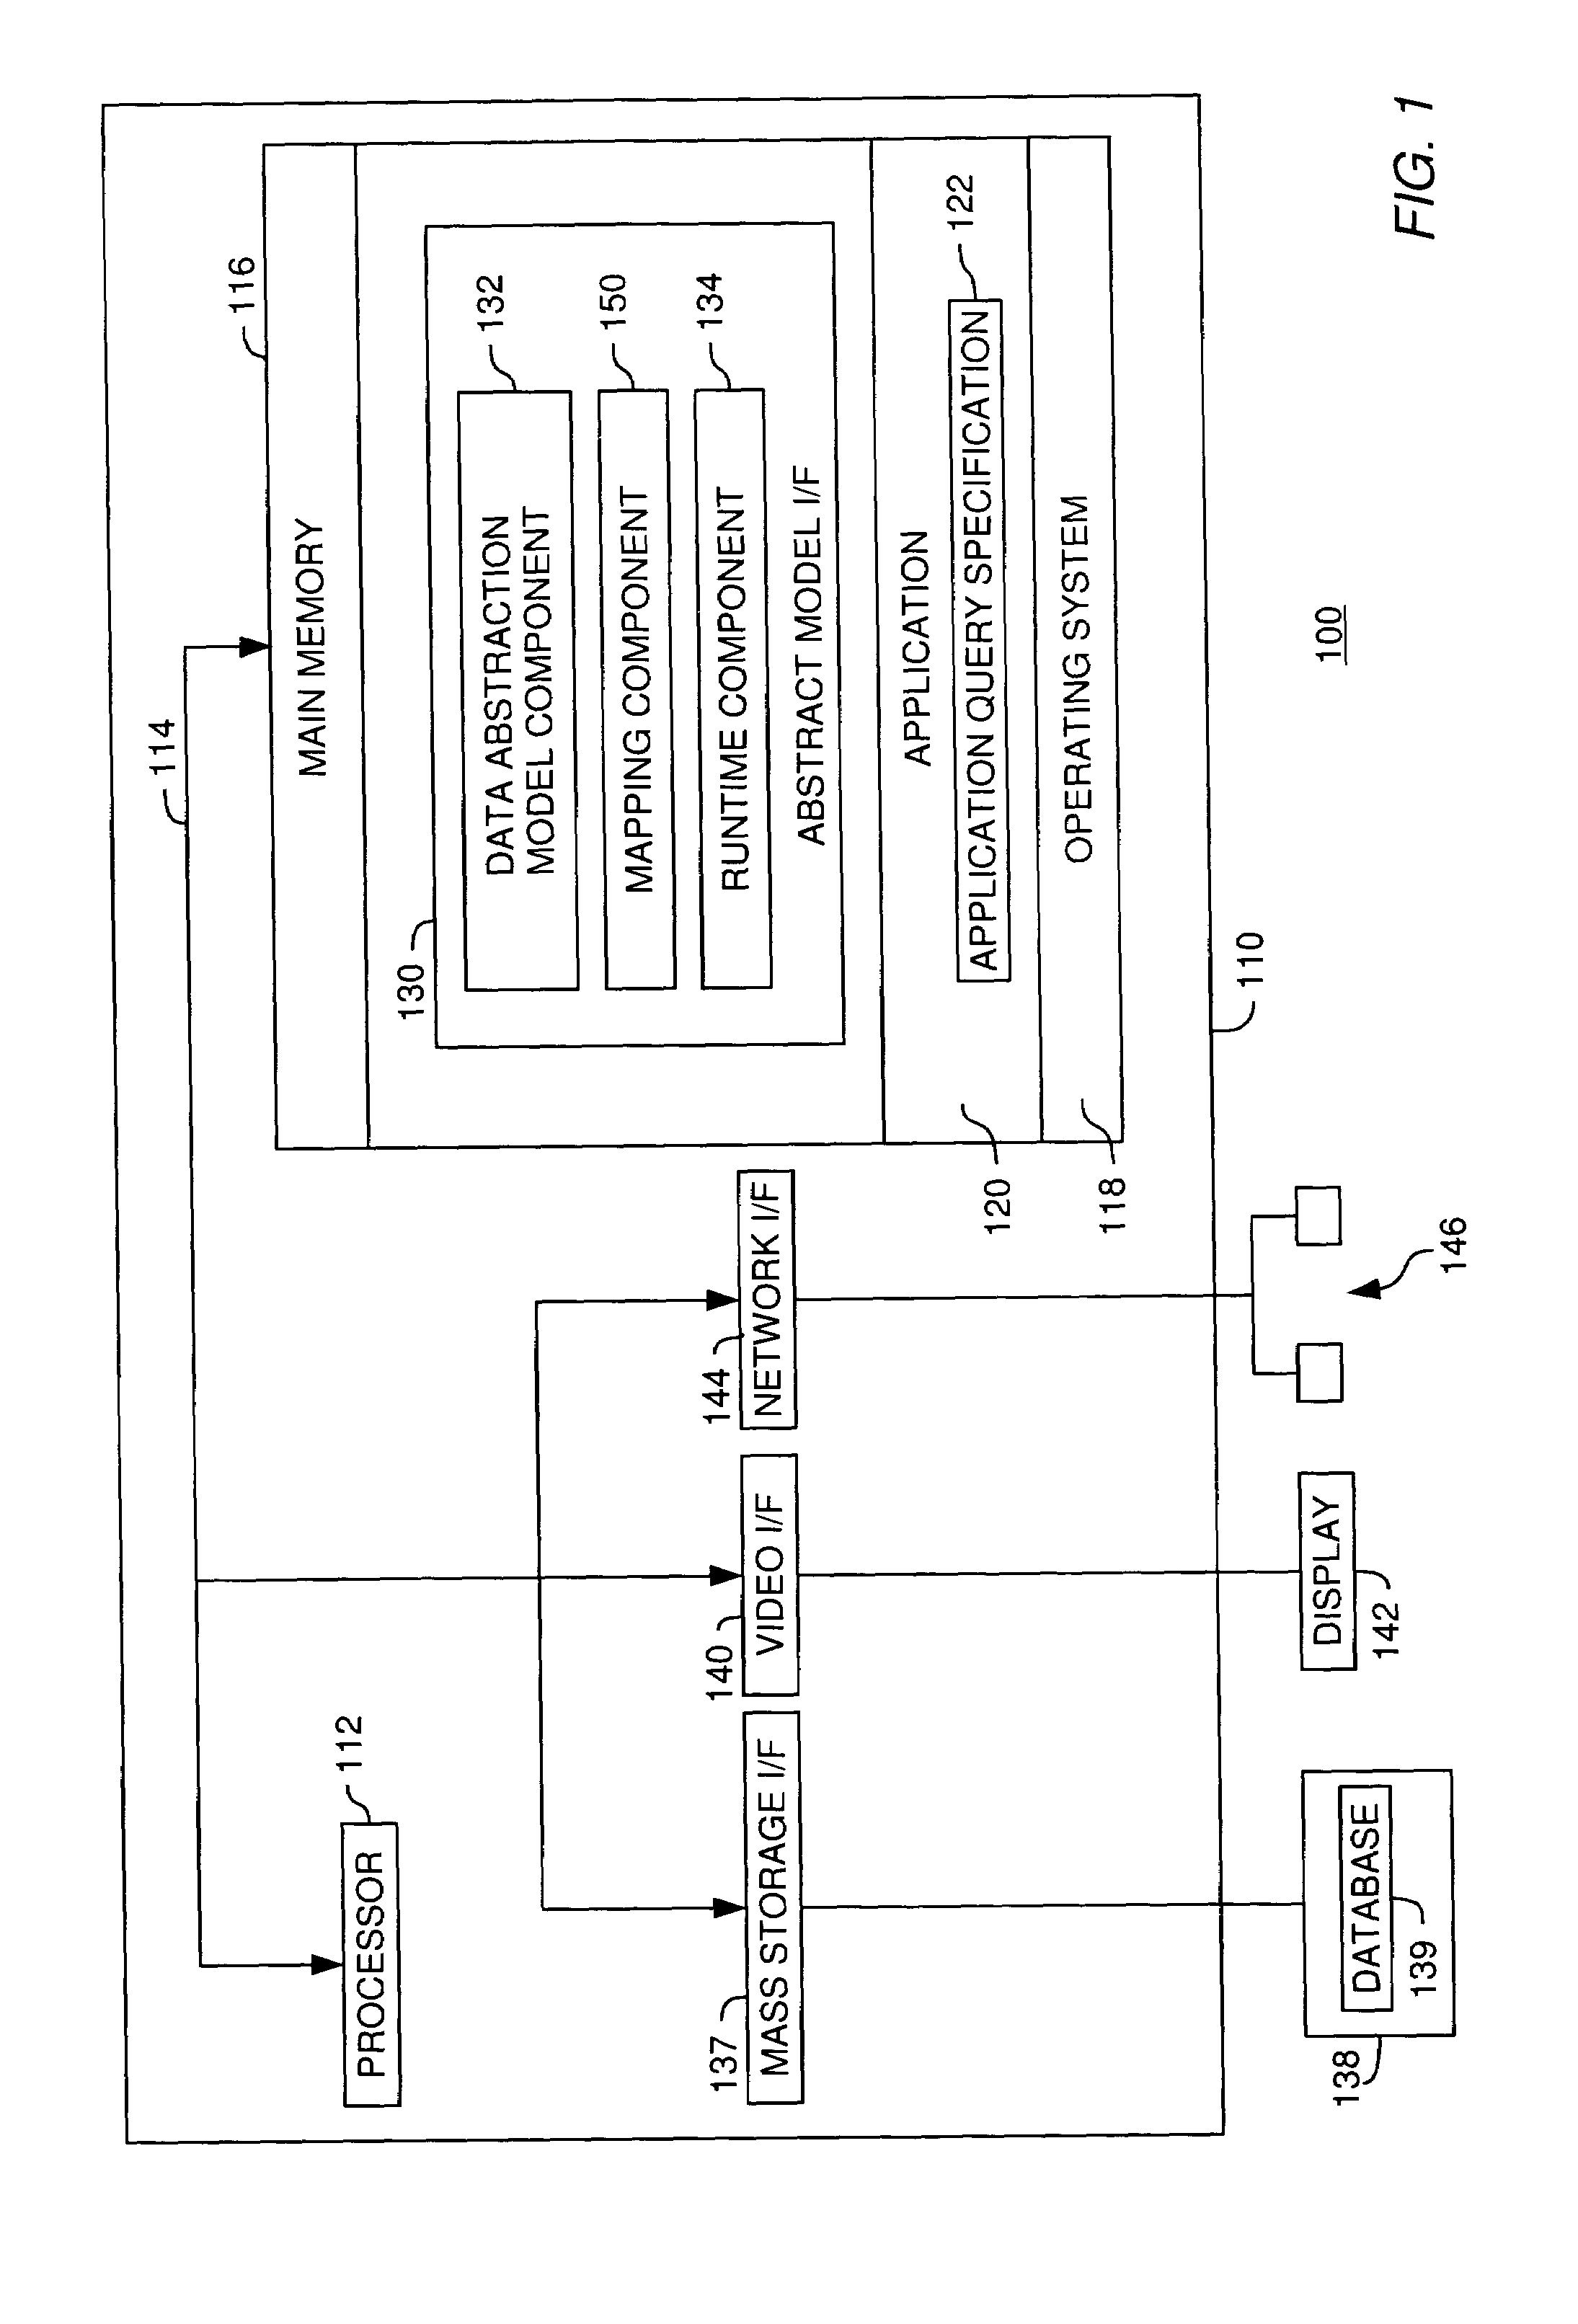 Extensible framework supporting deposit of heterogenous data sources into a target data repository